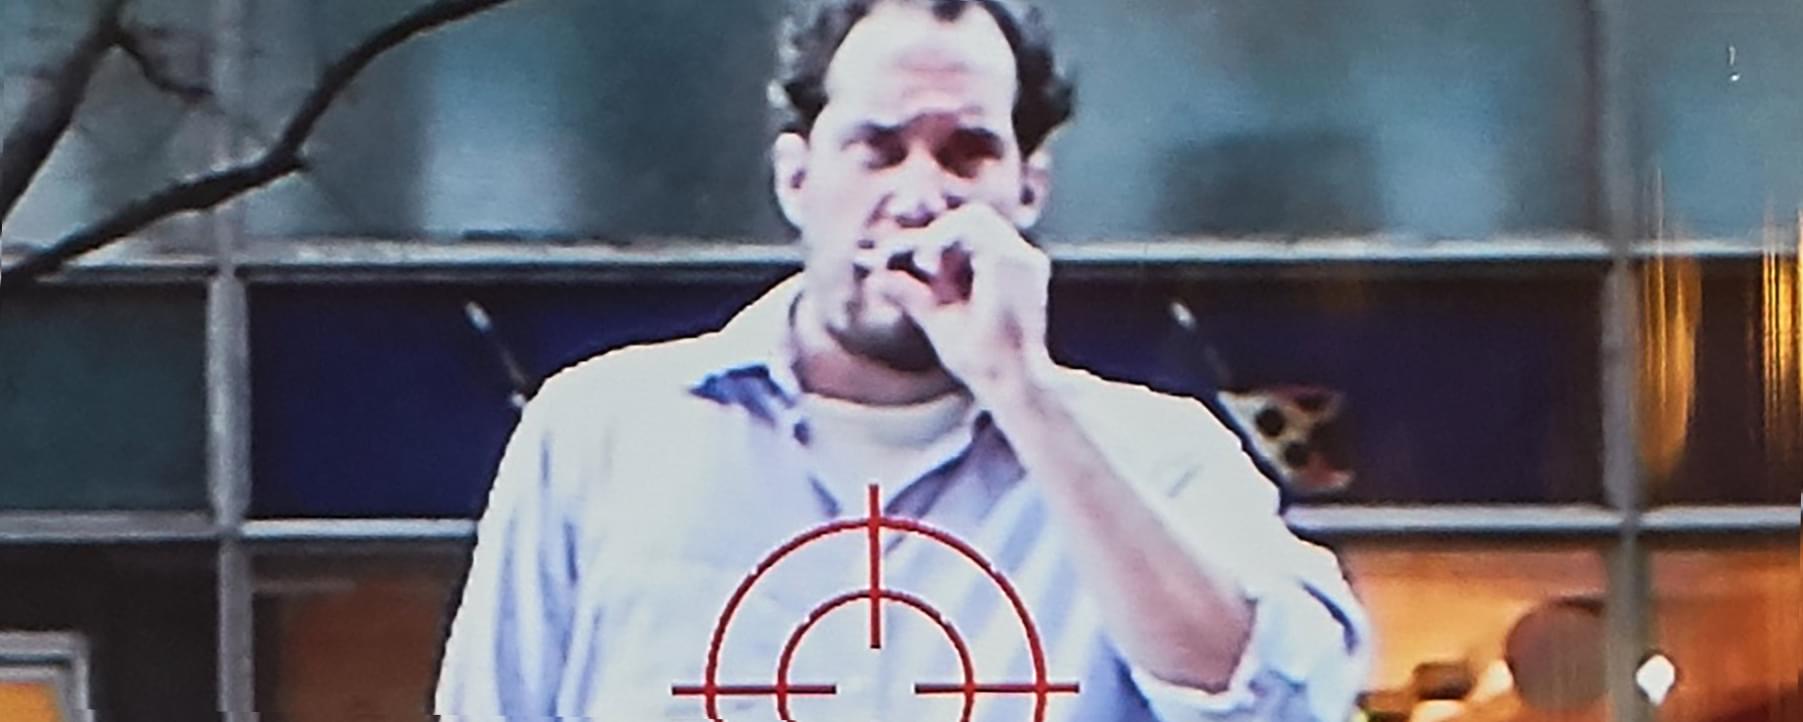 Close up grainy photograph of a man smoking a cigarette in a white button down shirt, with a cross-hairs target symbol shown on top his shirt